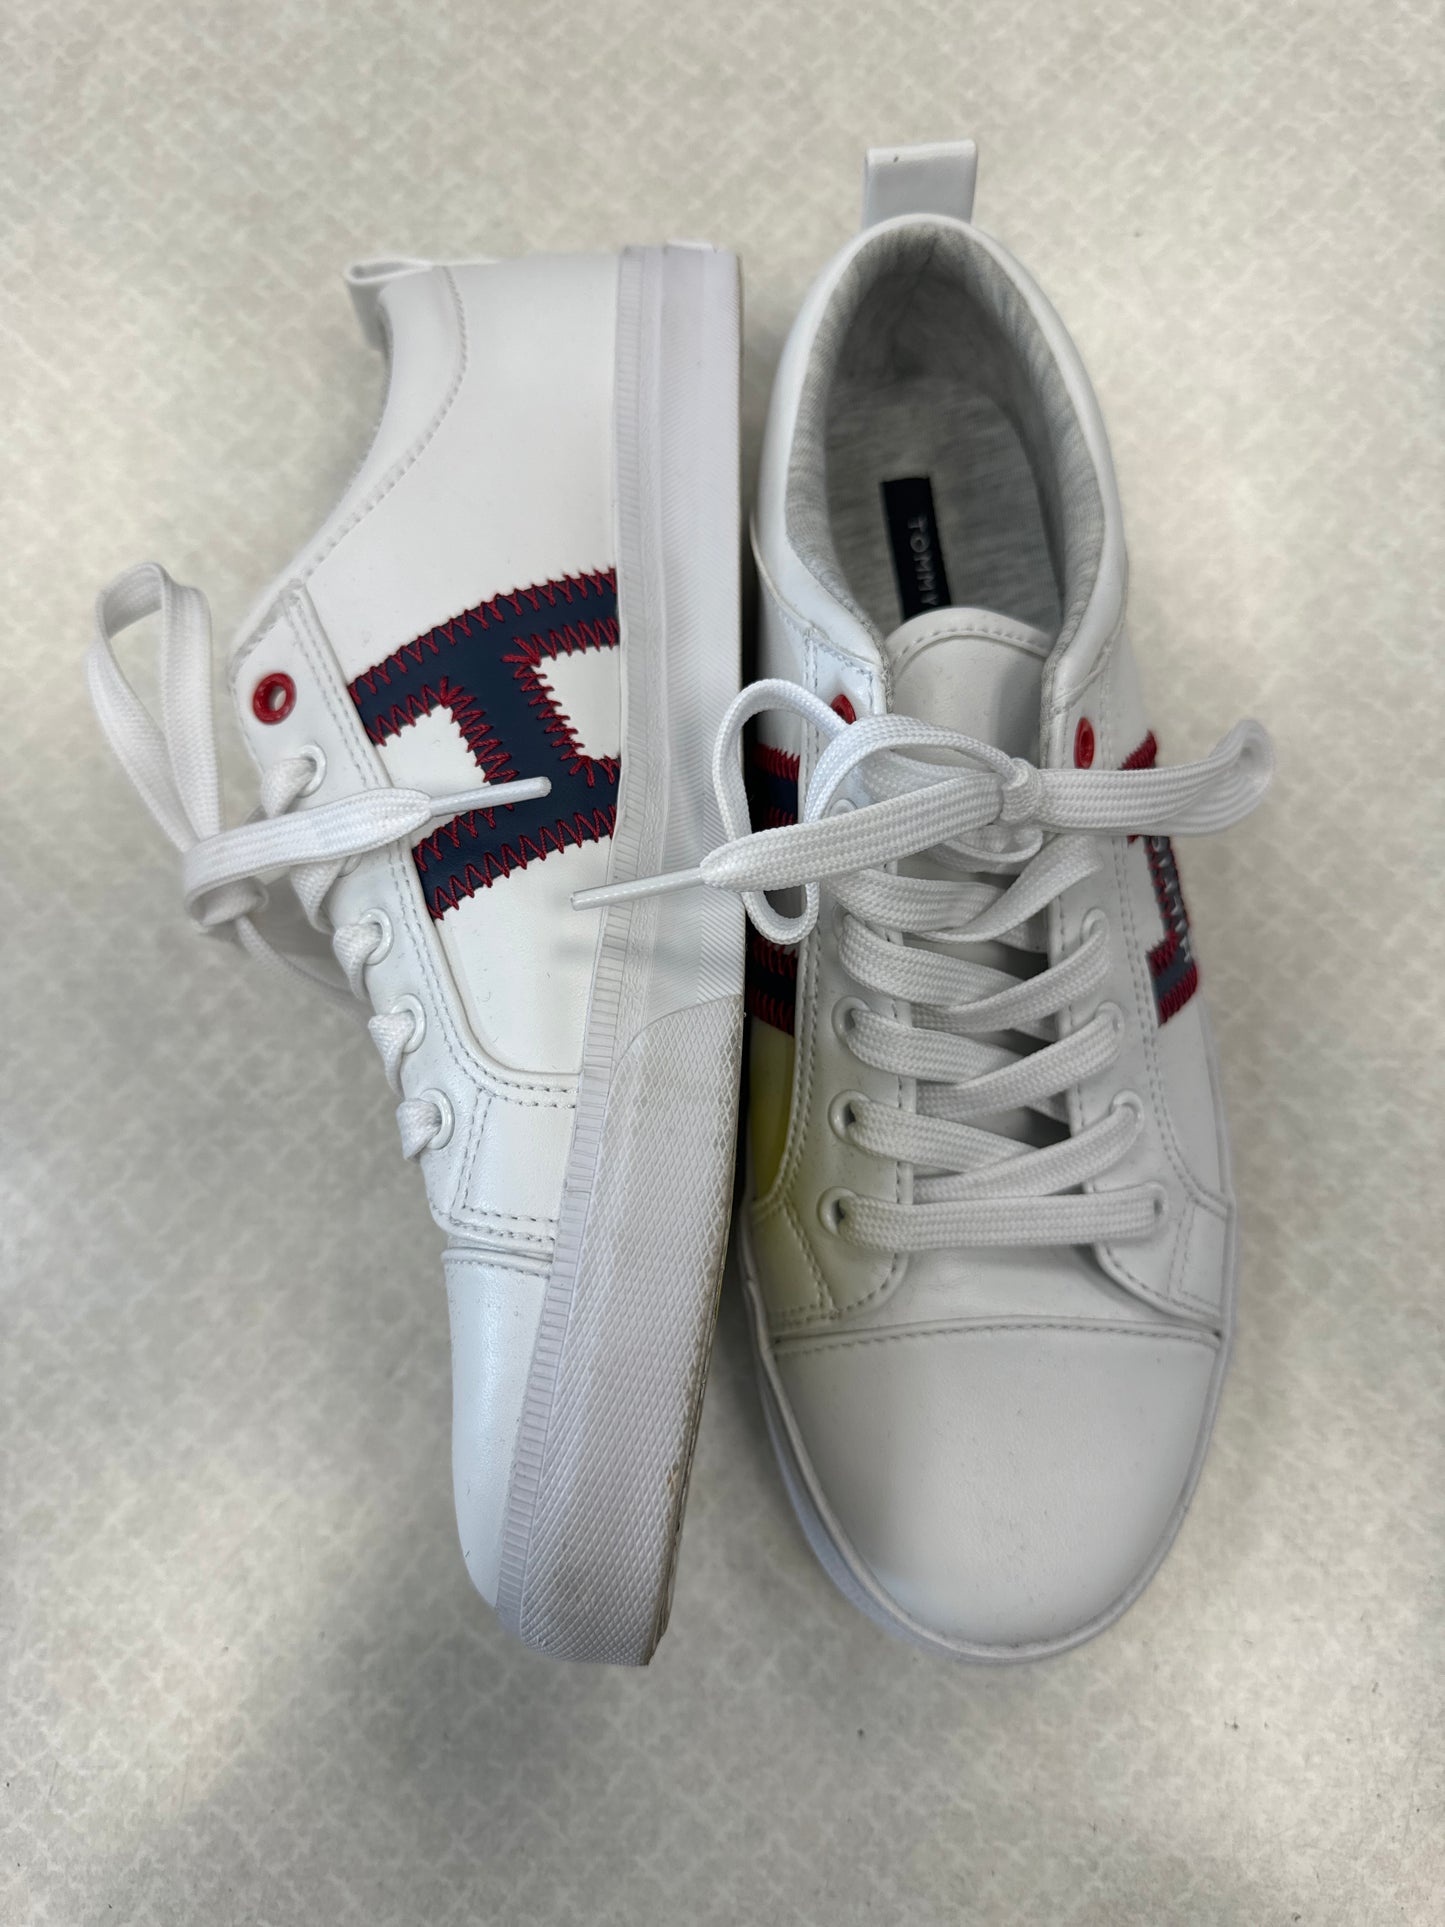 Shoes Athletic By Tommy Hilfiger  Size: 7.5